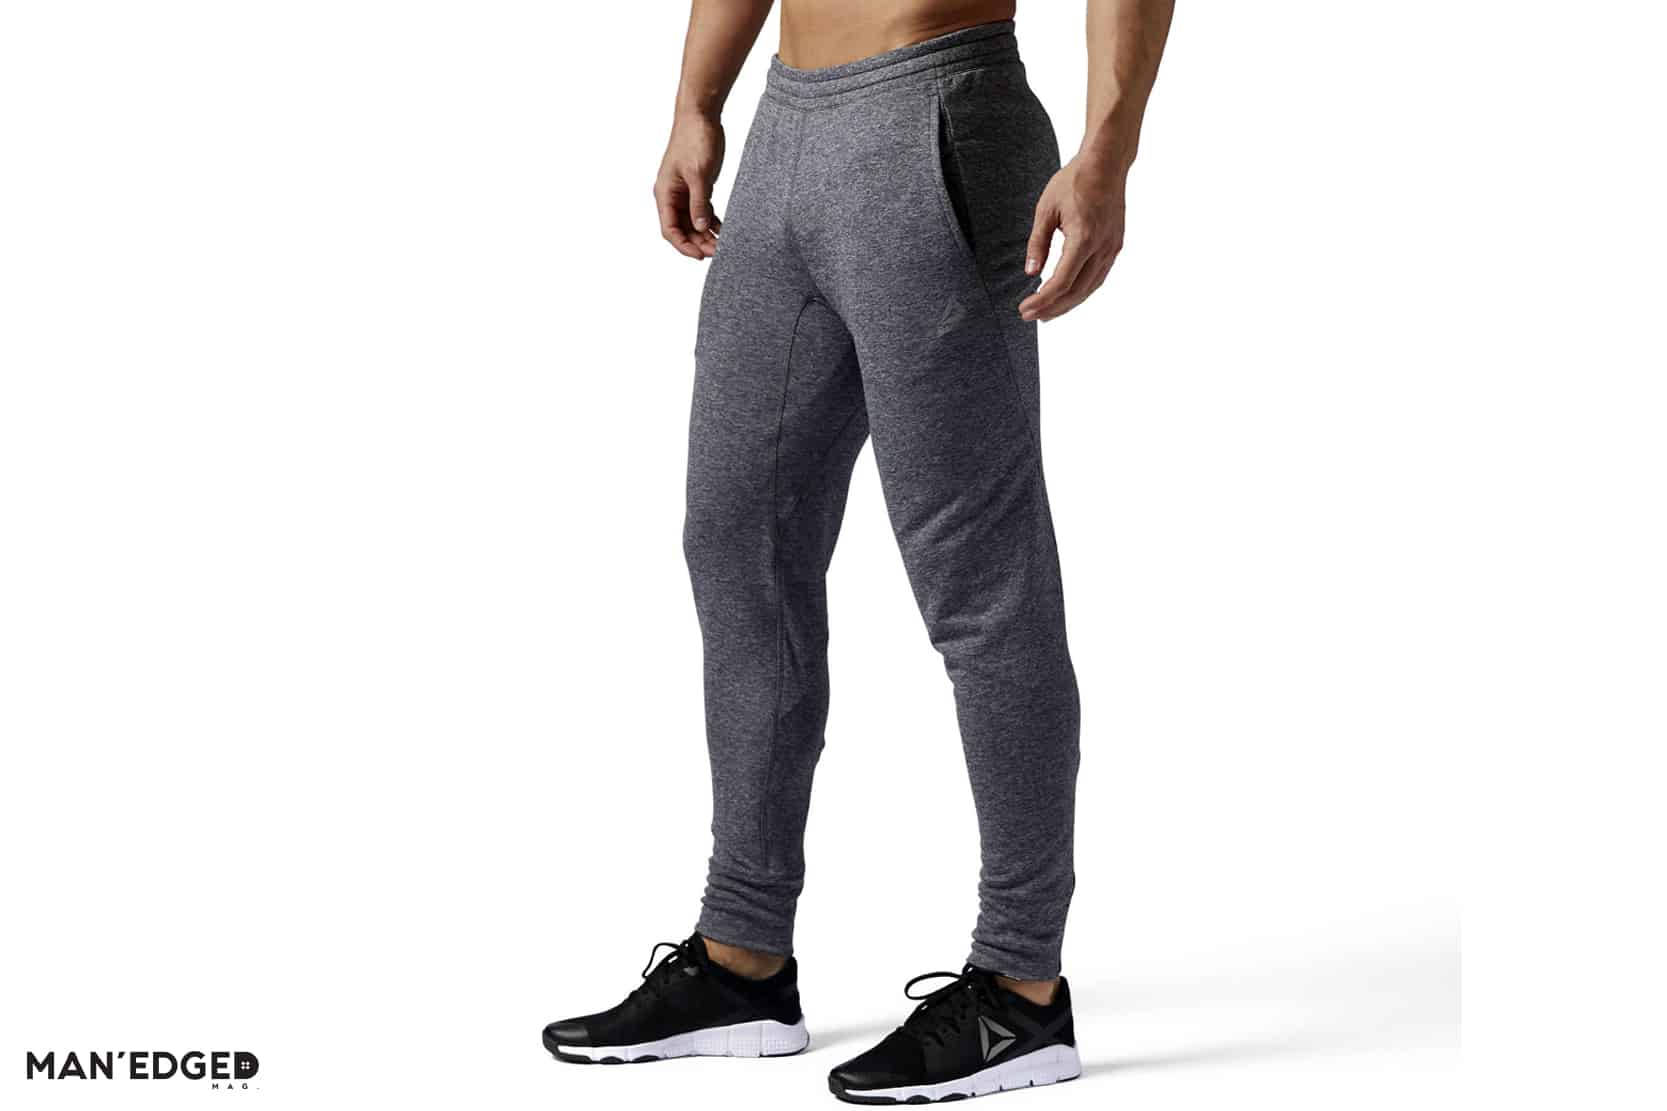 How to Gift to the Athleisure Obsessed Man featuring reebok casual JJWATT men's joggers